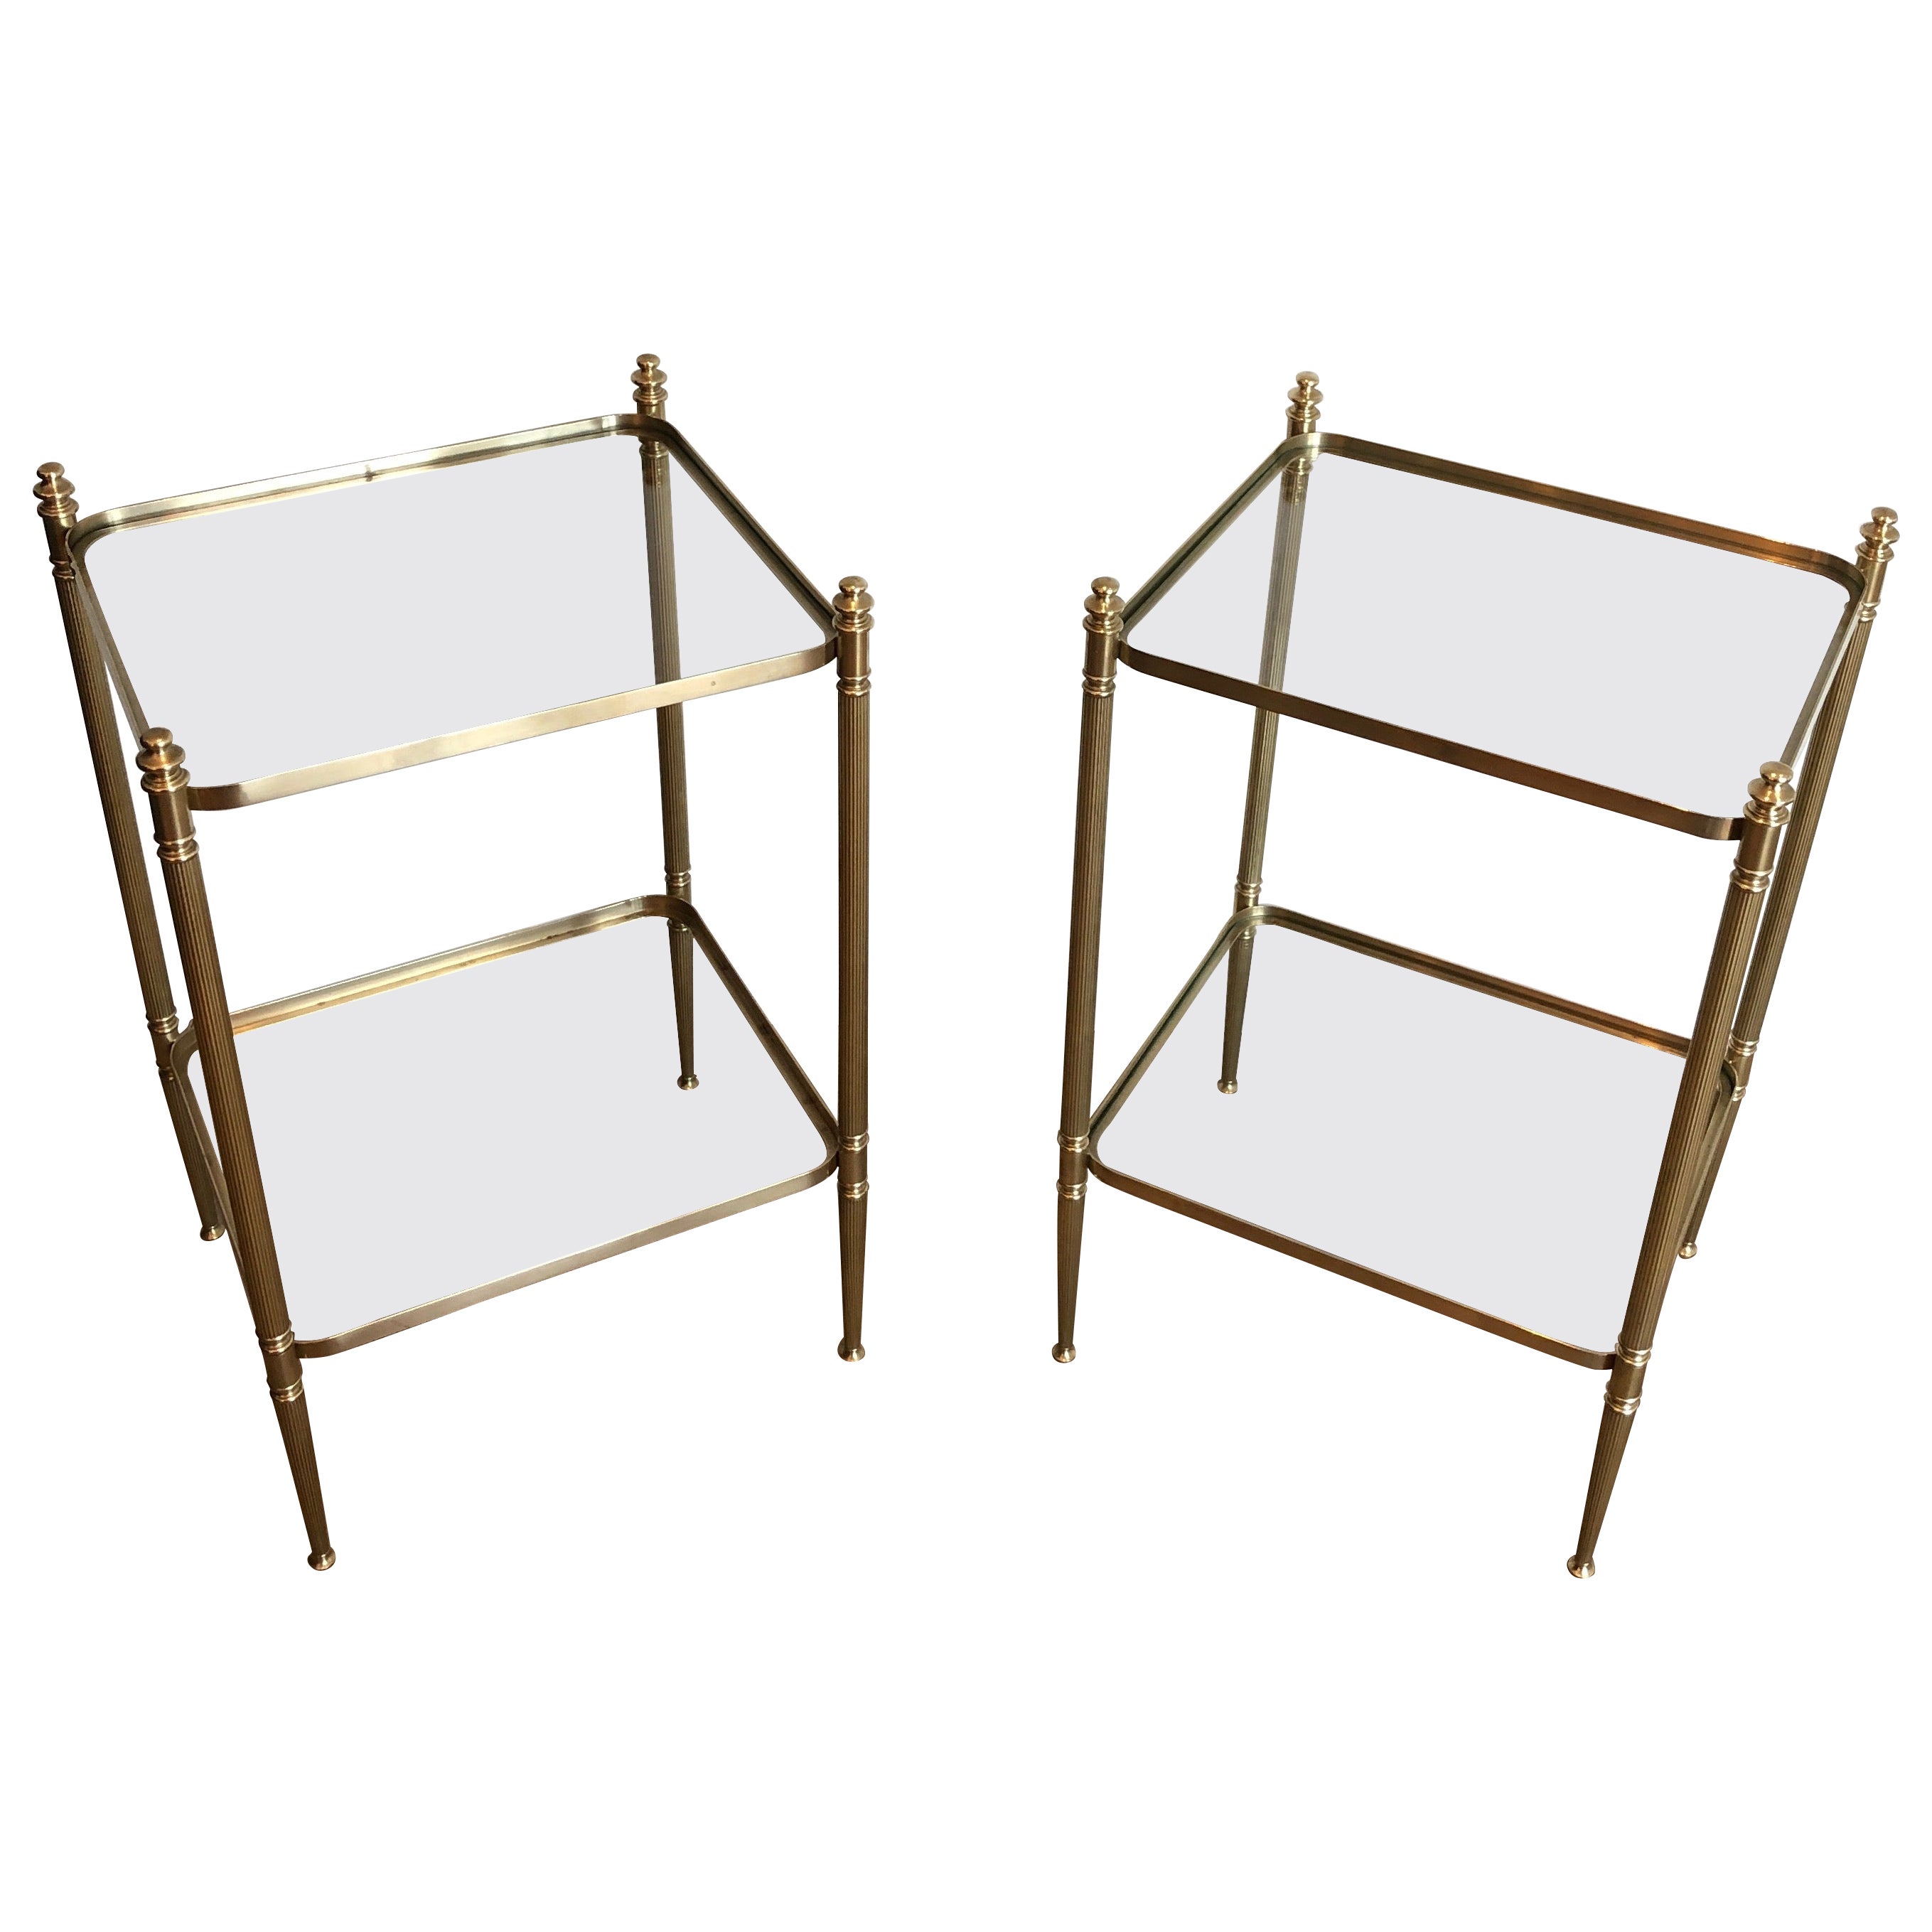 Pair of Neoclassical Style Brass Side Tables in the Style of Maison Jansen